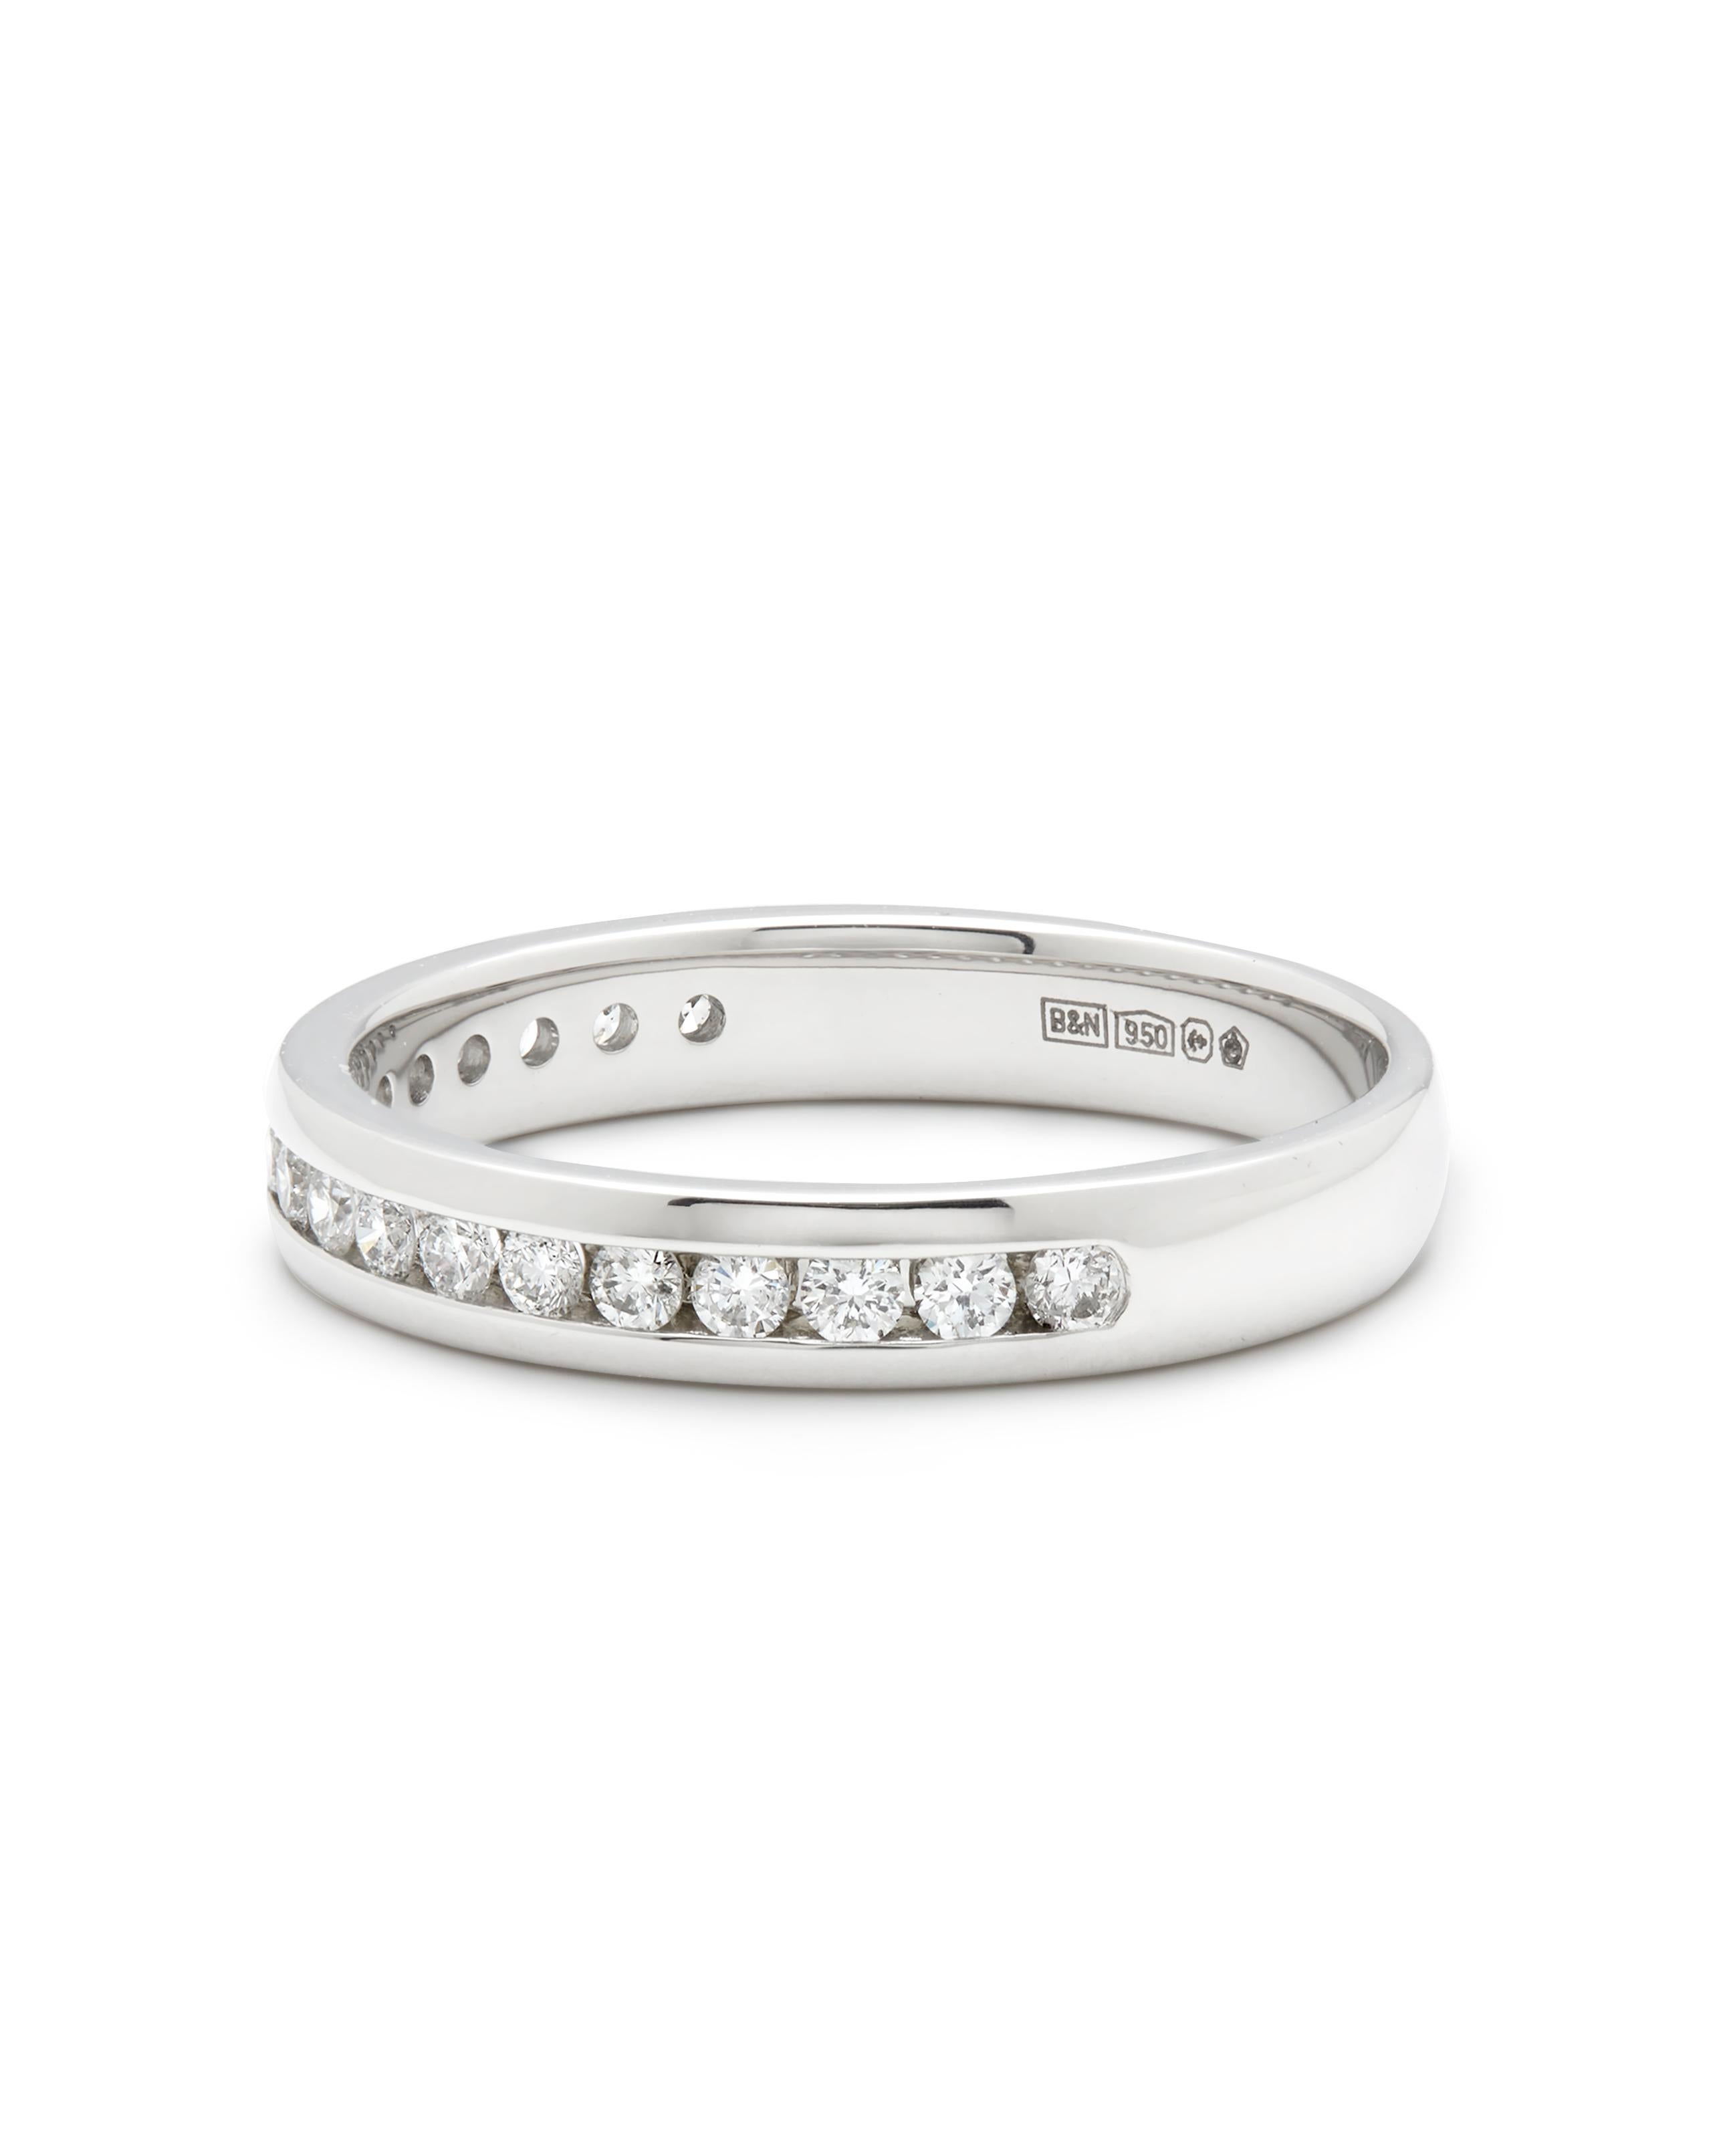 Brilliant Cut Handcrafted Platinum Diamond Band Set with 0.30ct Diamonds in a Channel Set For Sale